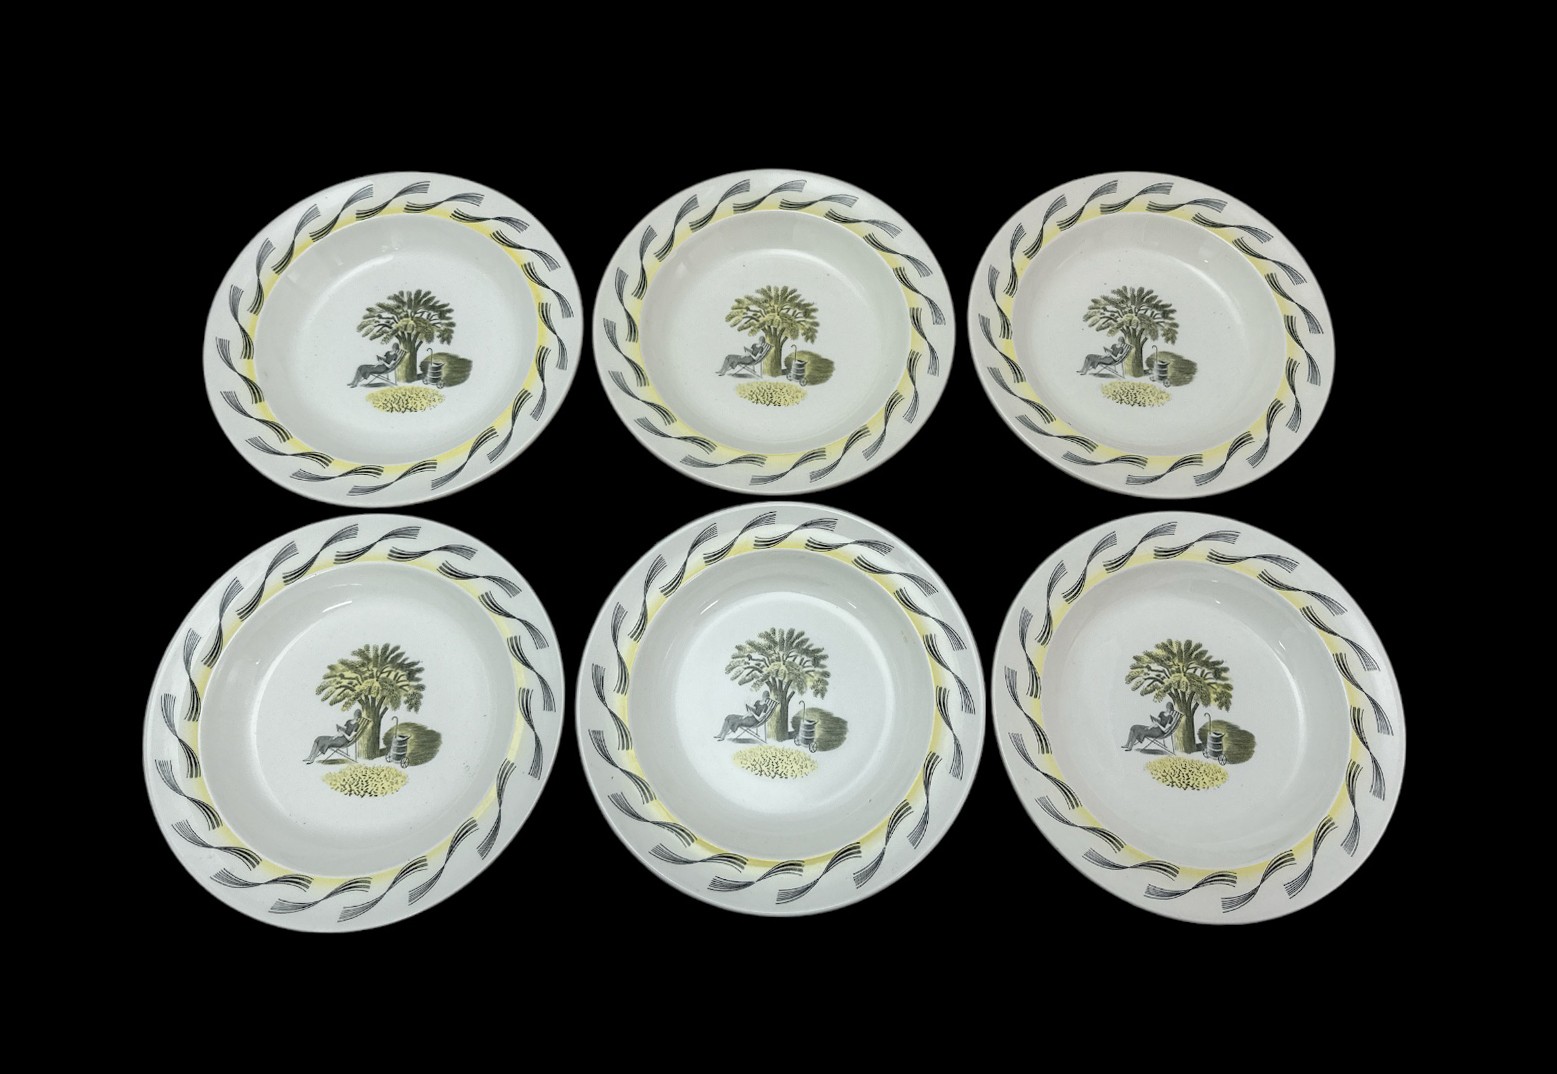 Wedgwood, a set of six Wedgwood bowls 'Garden' designed by Eric Ravilious, printed with a vignette